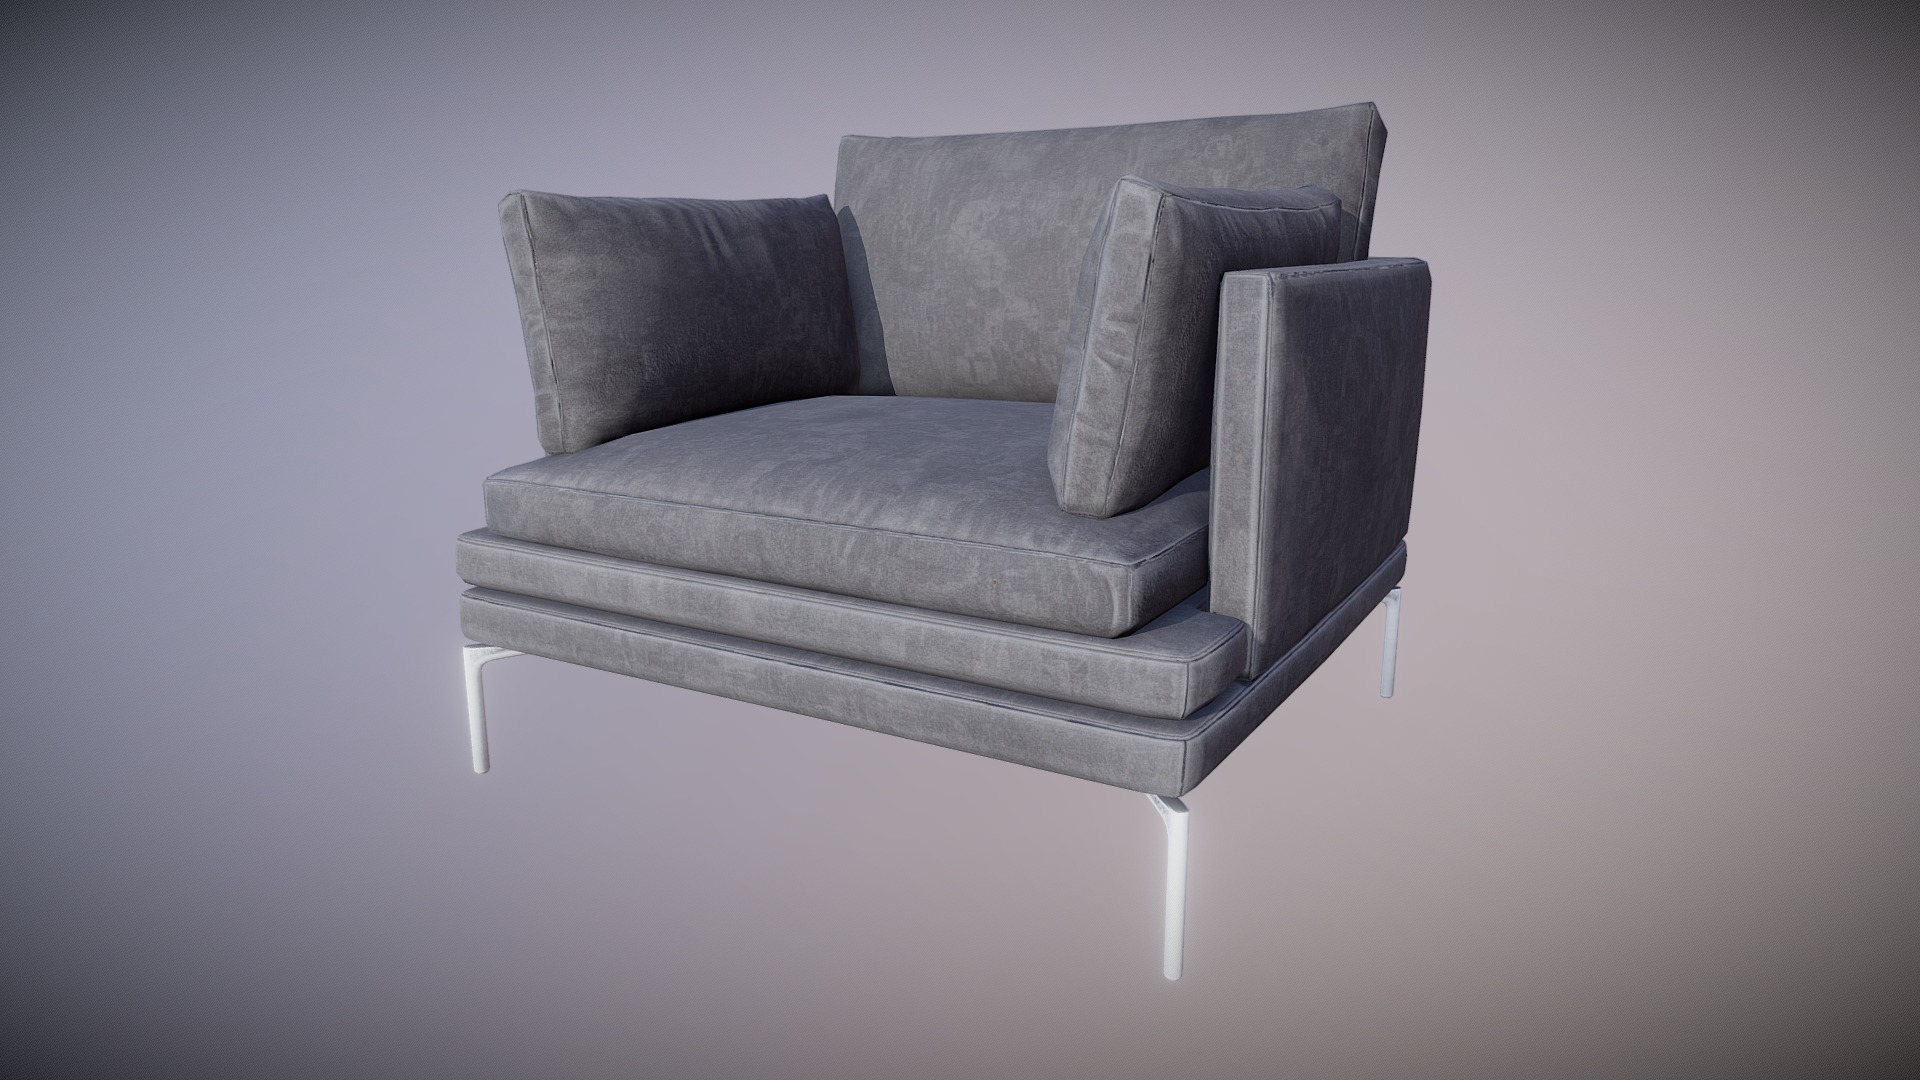 3D model arm chair - This is a 3D model of the arm chair. The 3D model is about a grey couch with a grey cushion.